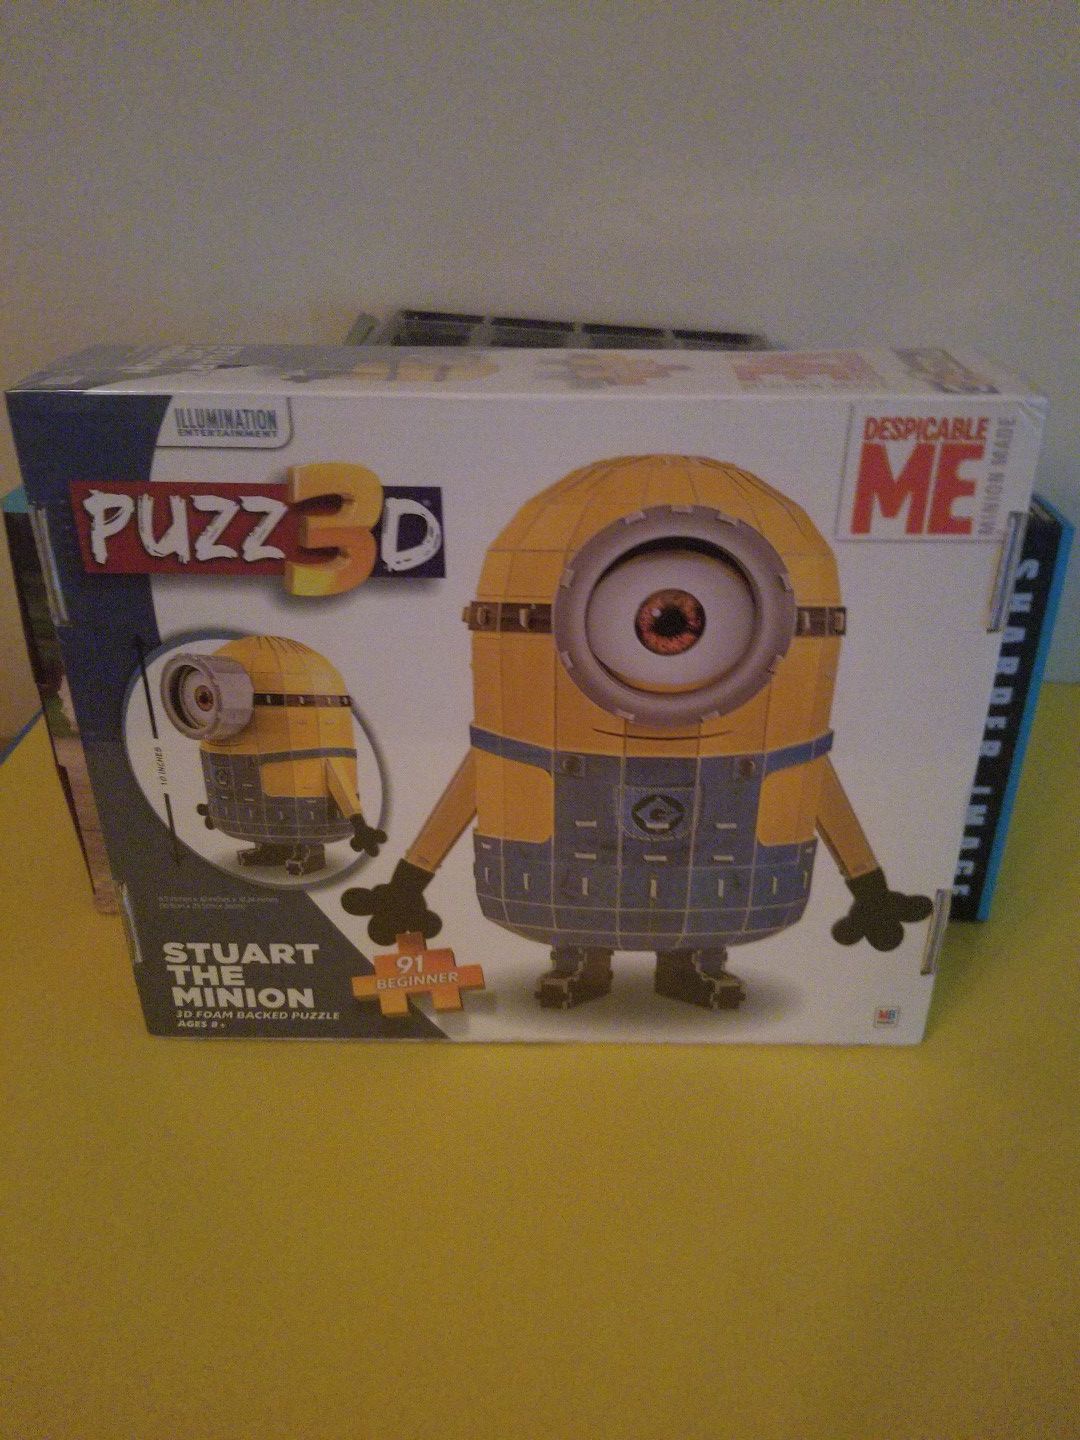 Brand new sealed in Box 3-D Minion Stewart puzzle